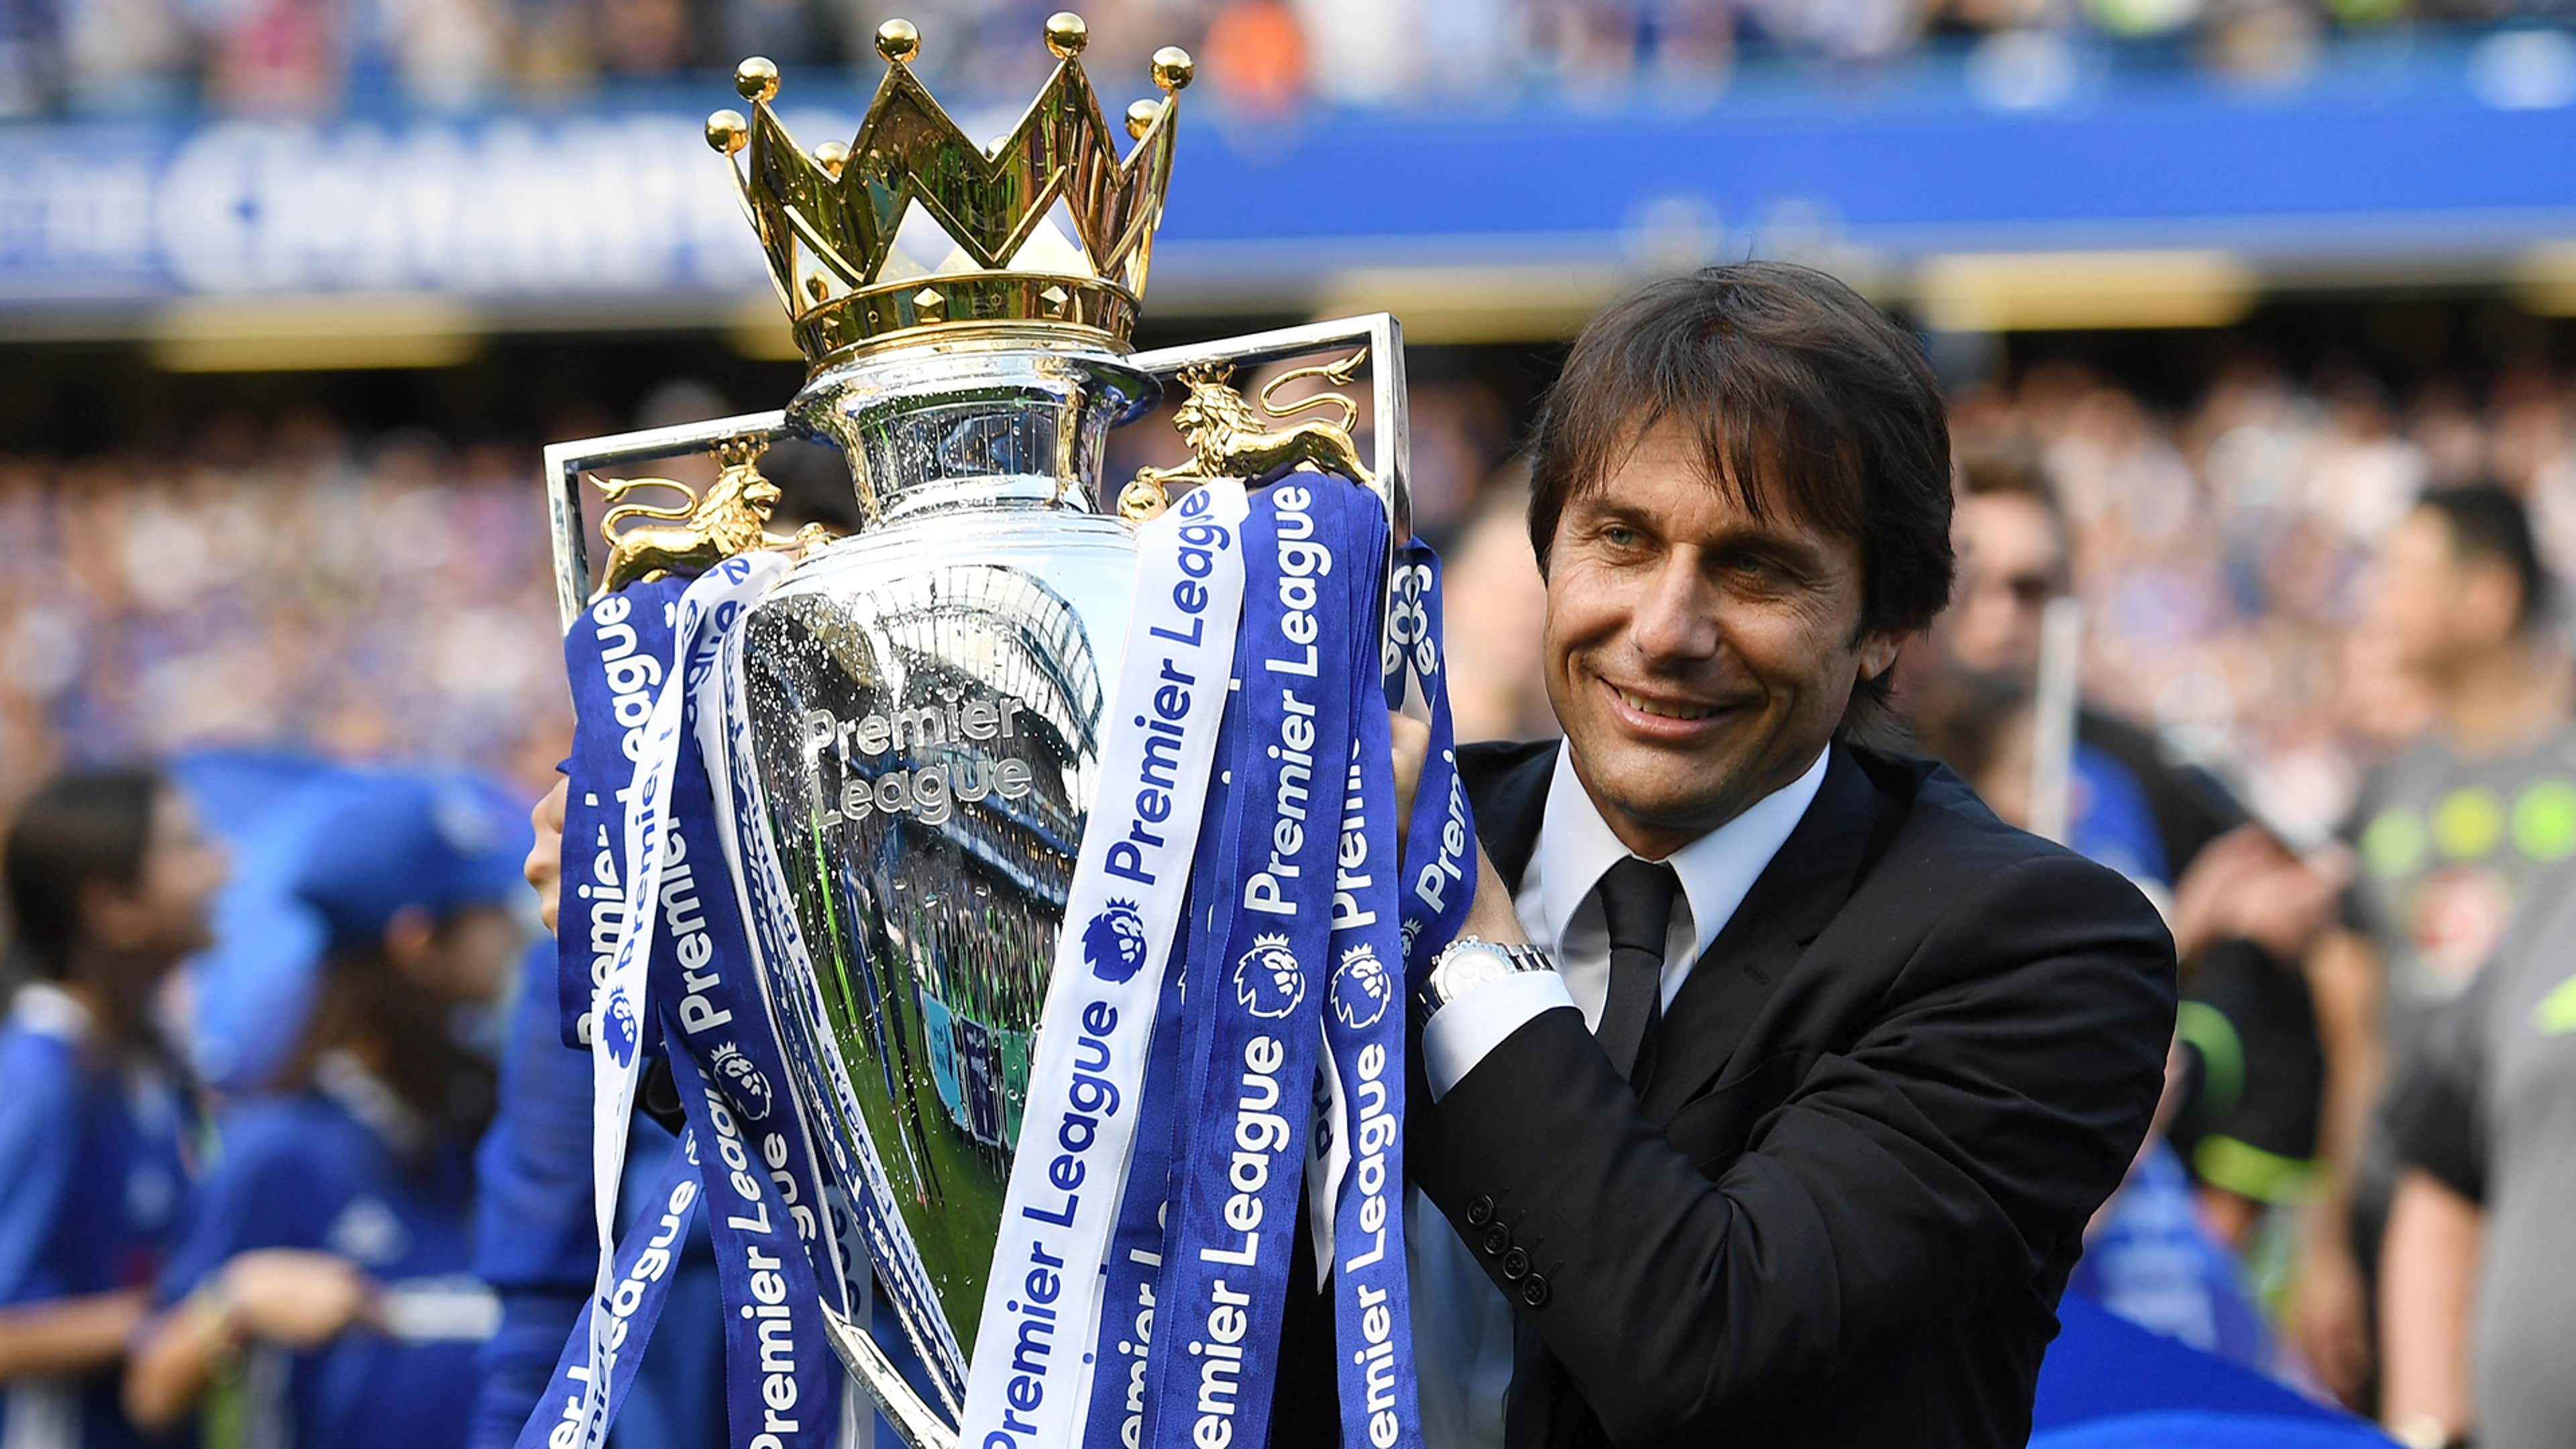 Antonio Conte puts Chelsea contract talks on hold as Inter Milan